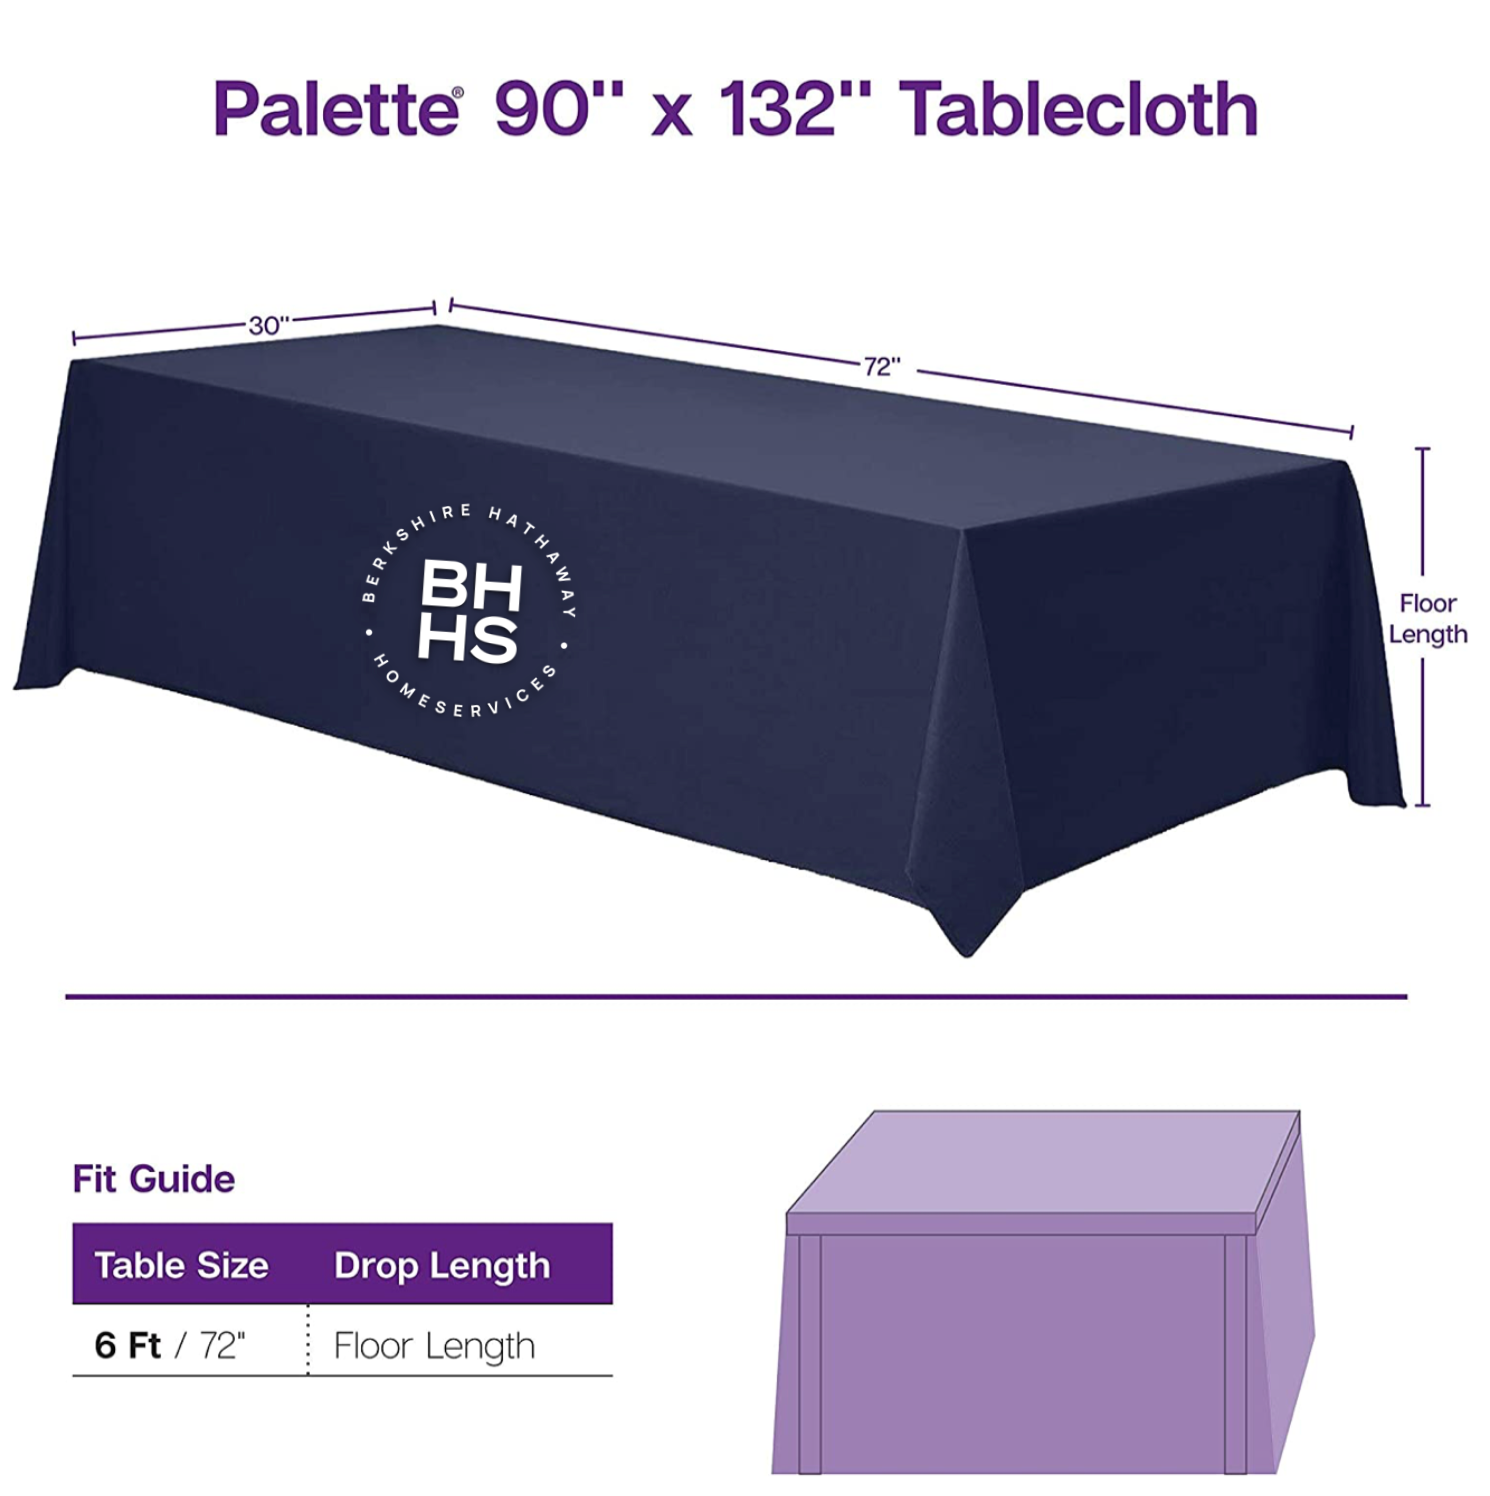 Berkshire Hathaway HomeServices Tablecloth 90 x 132" For 6' Table